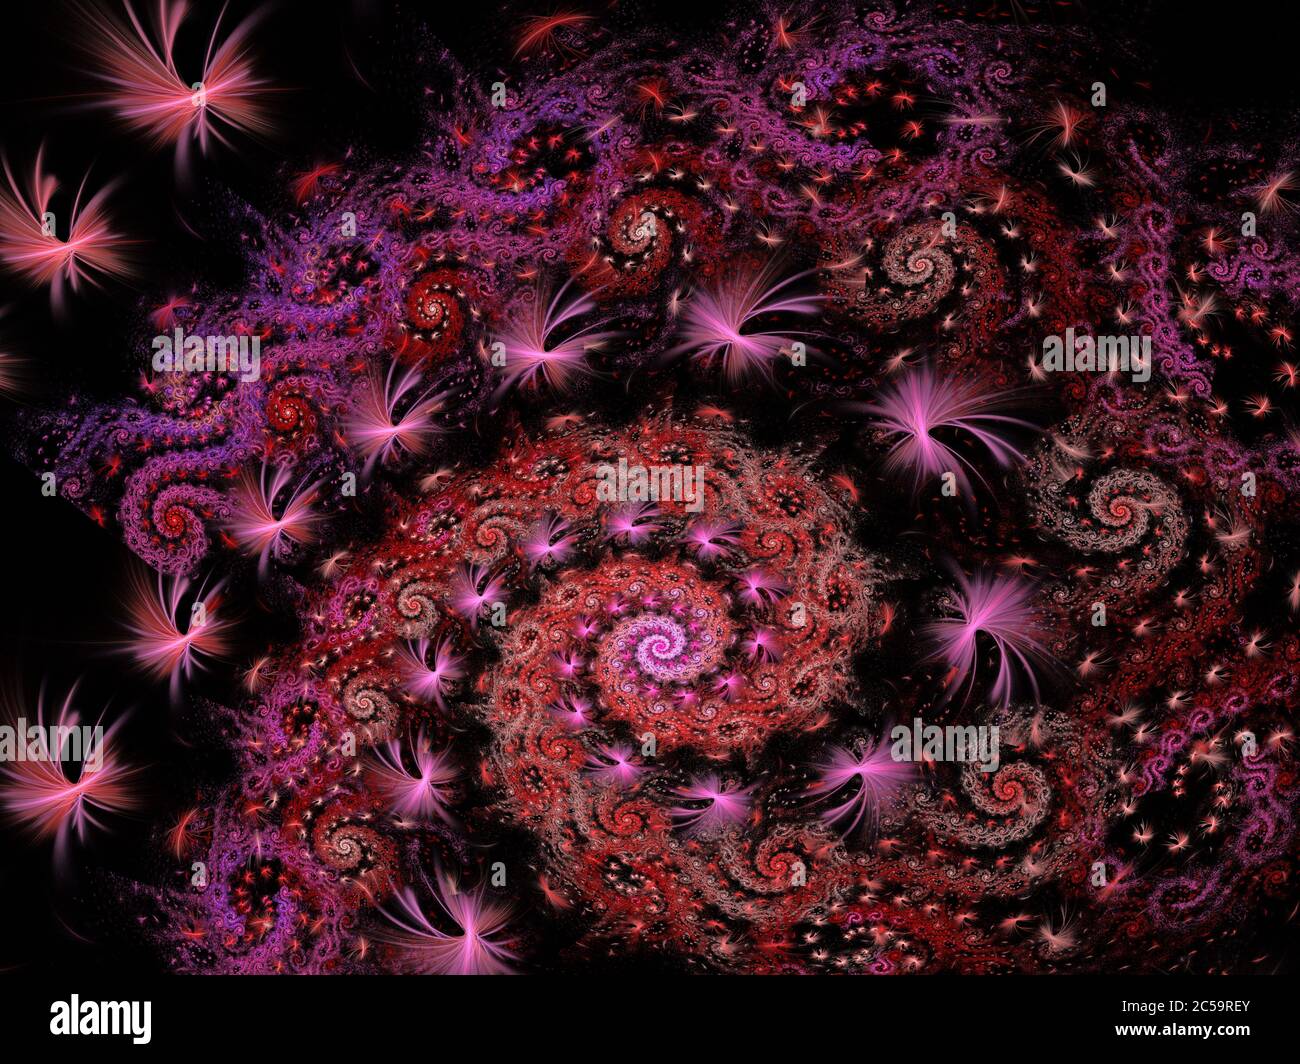 Pink Feathers Incorporated Into Spiral Flame Fractal Design Stock Photo